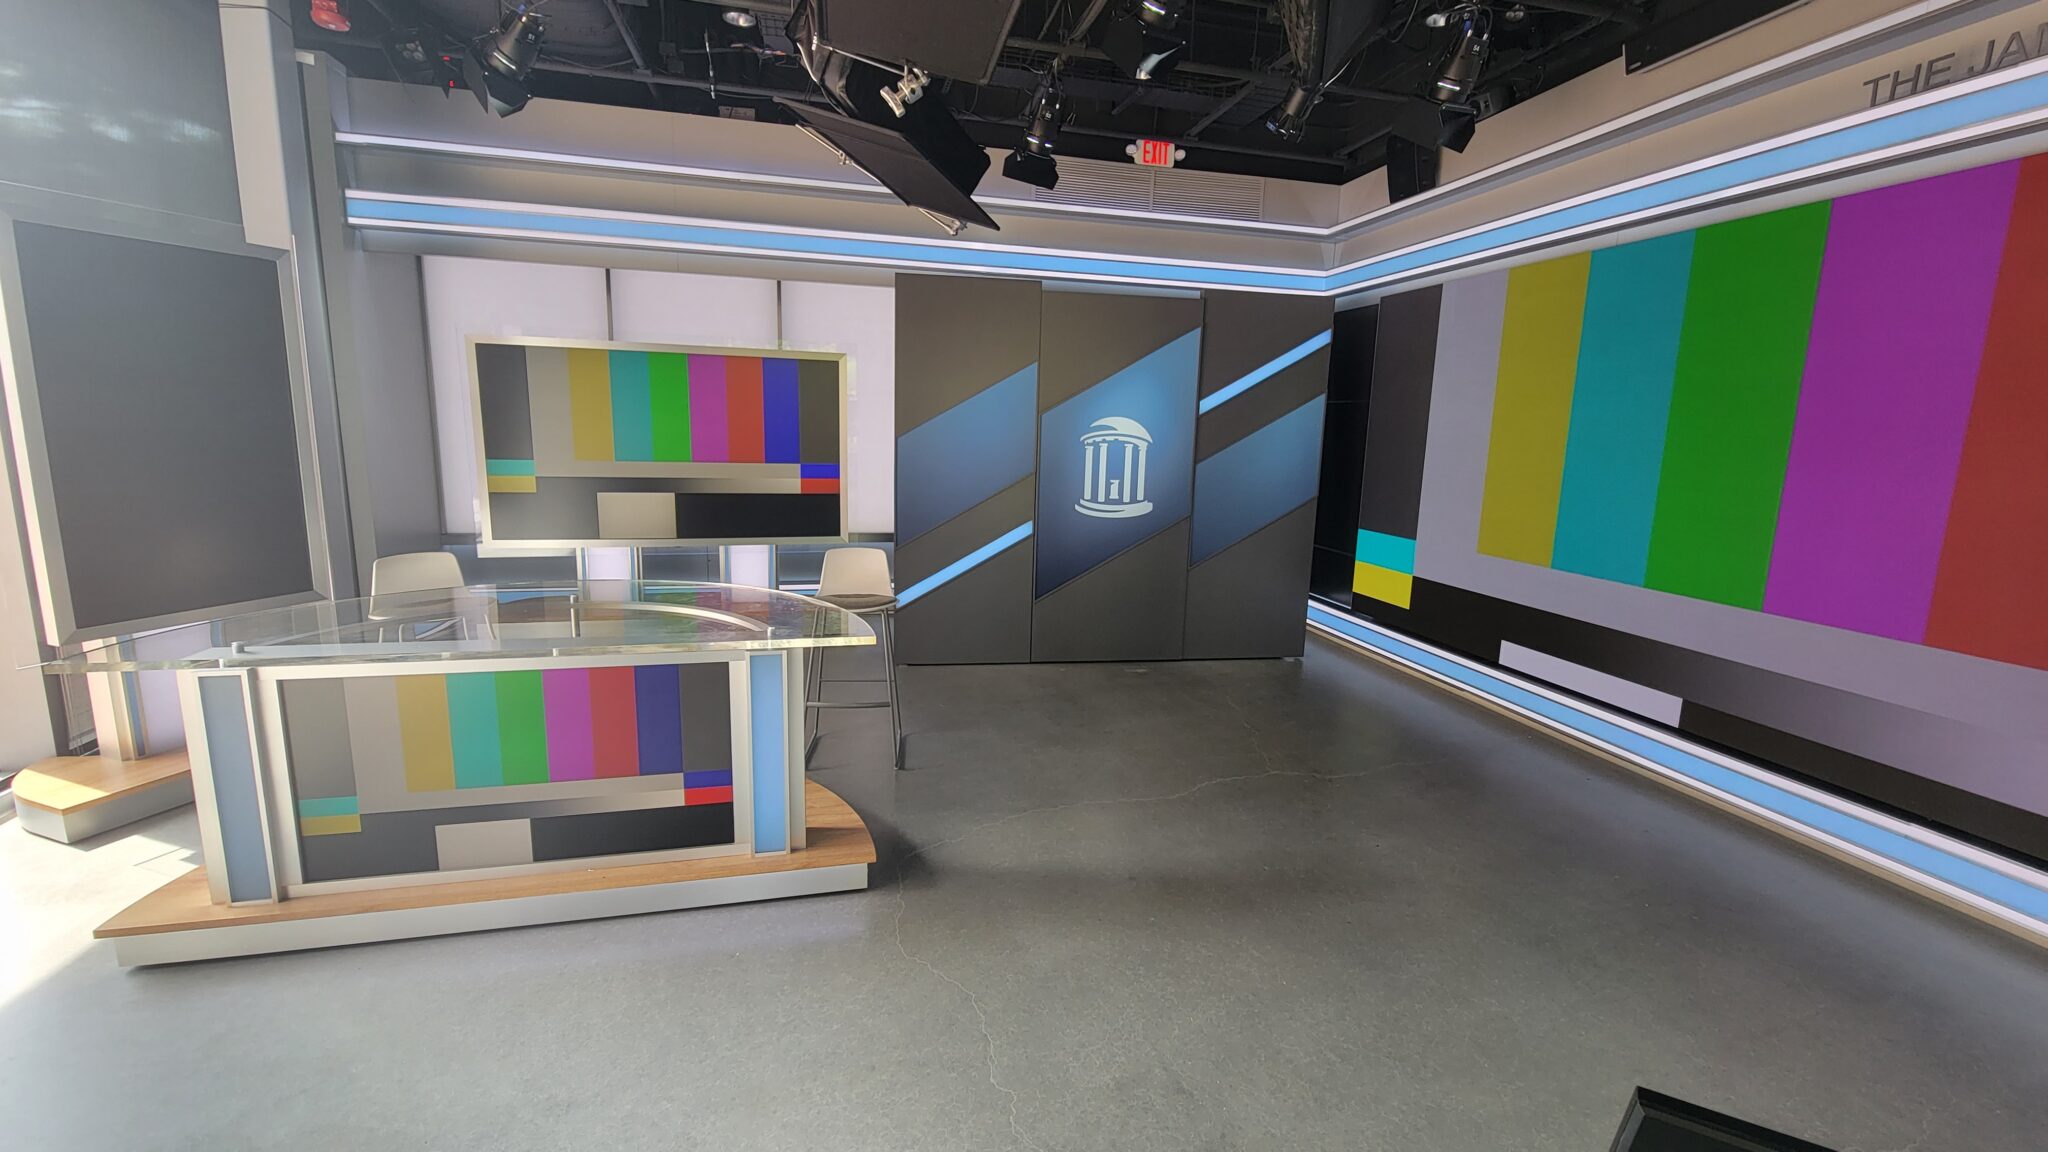 Room with a news desk and multiple screens for media production.